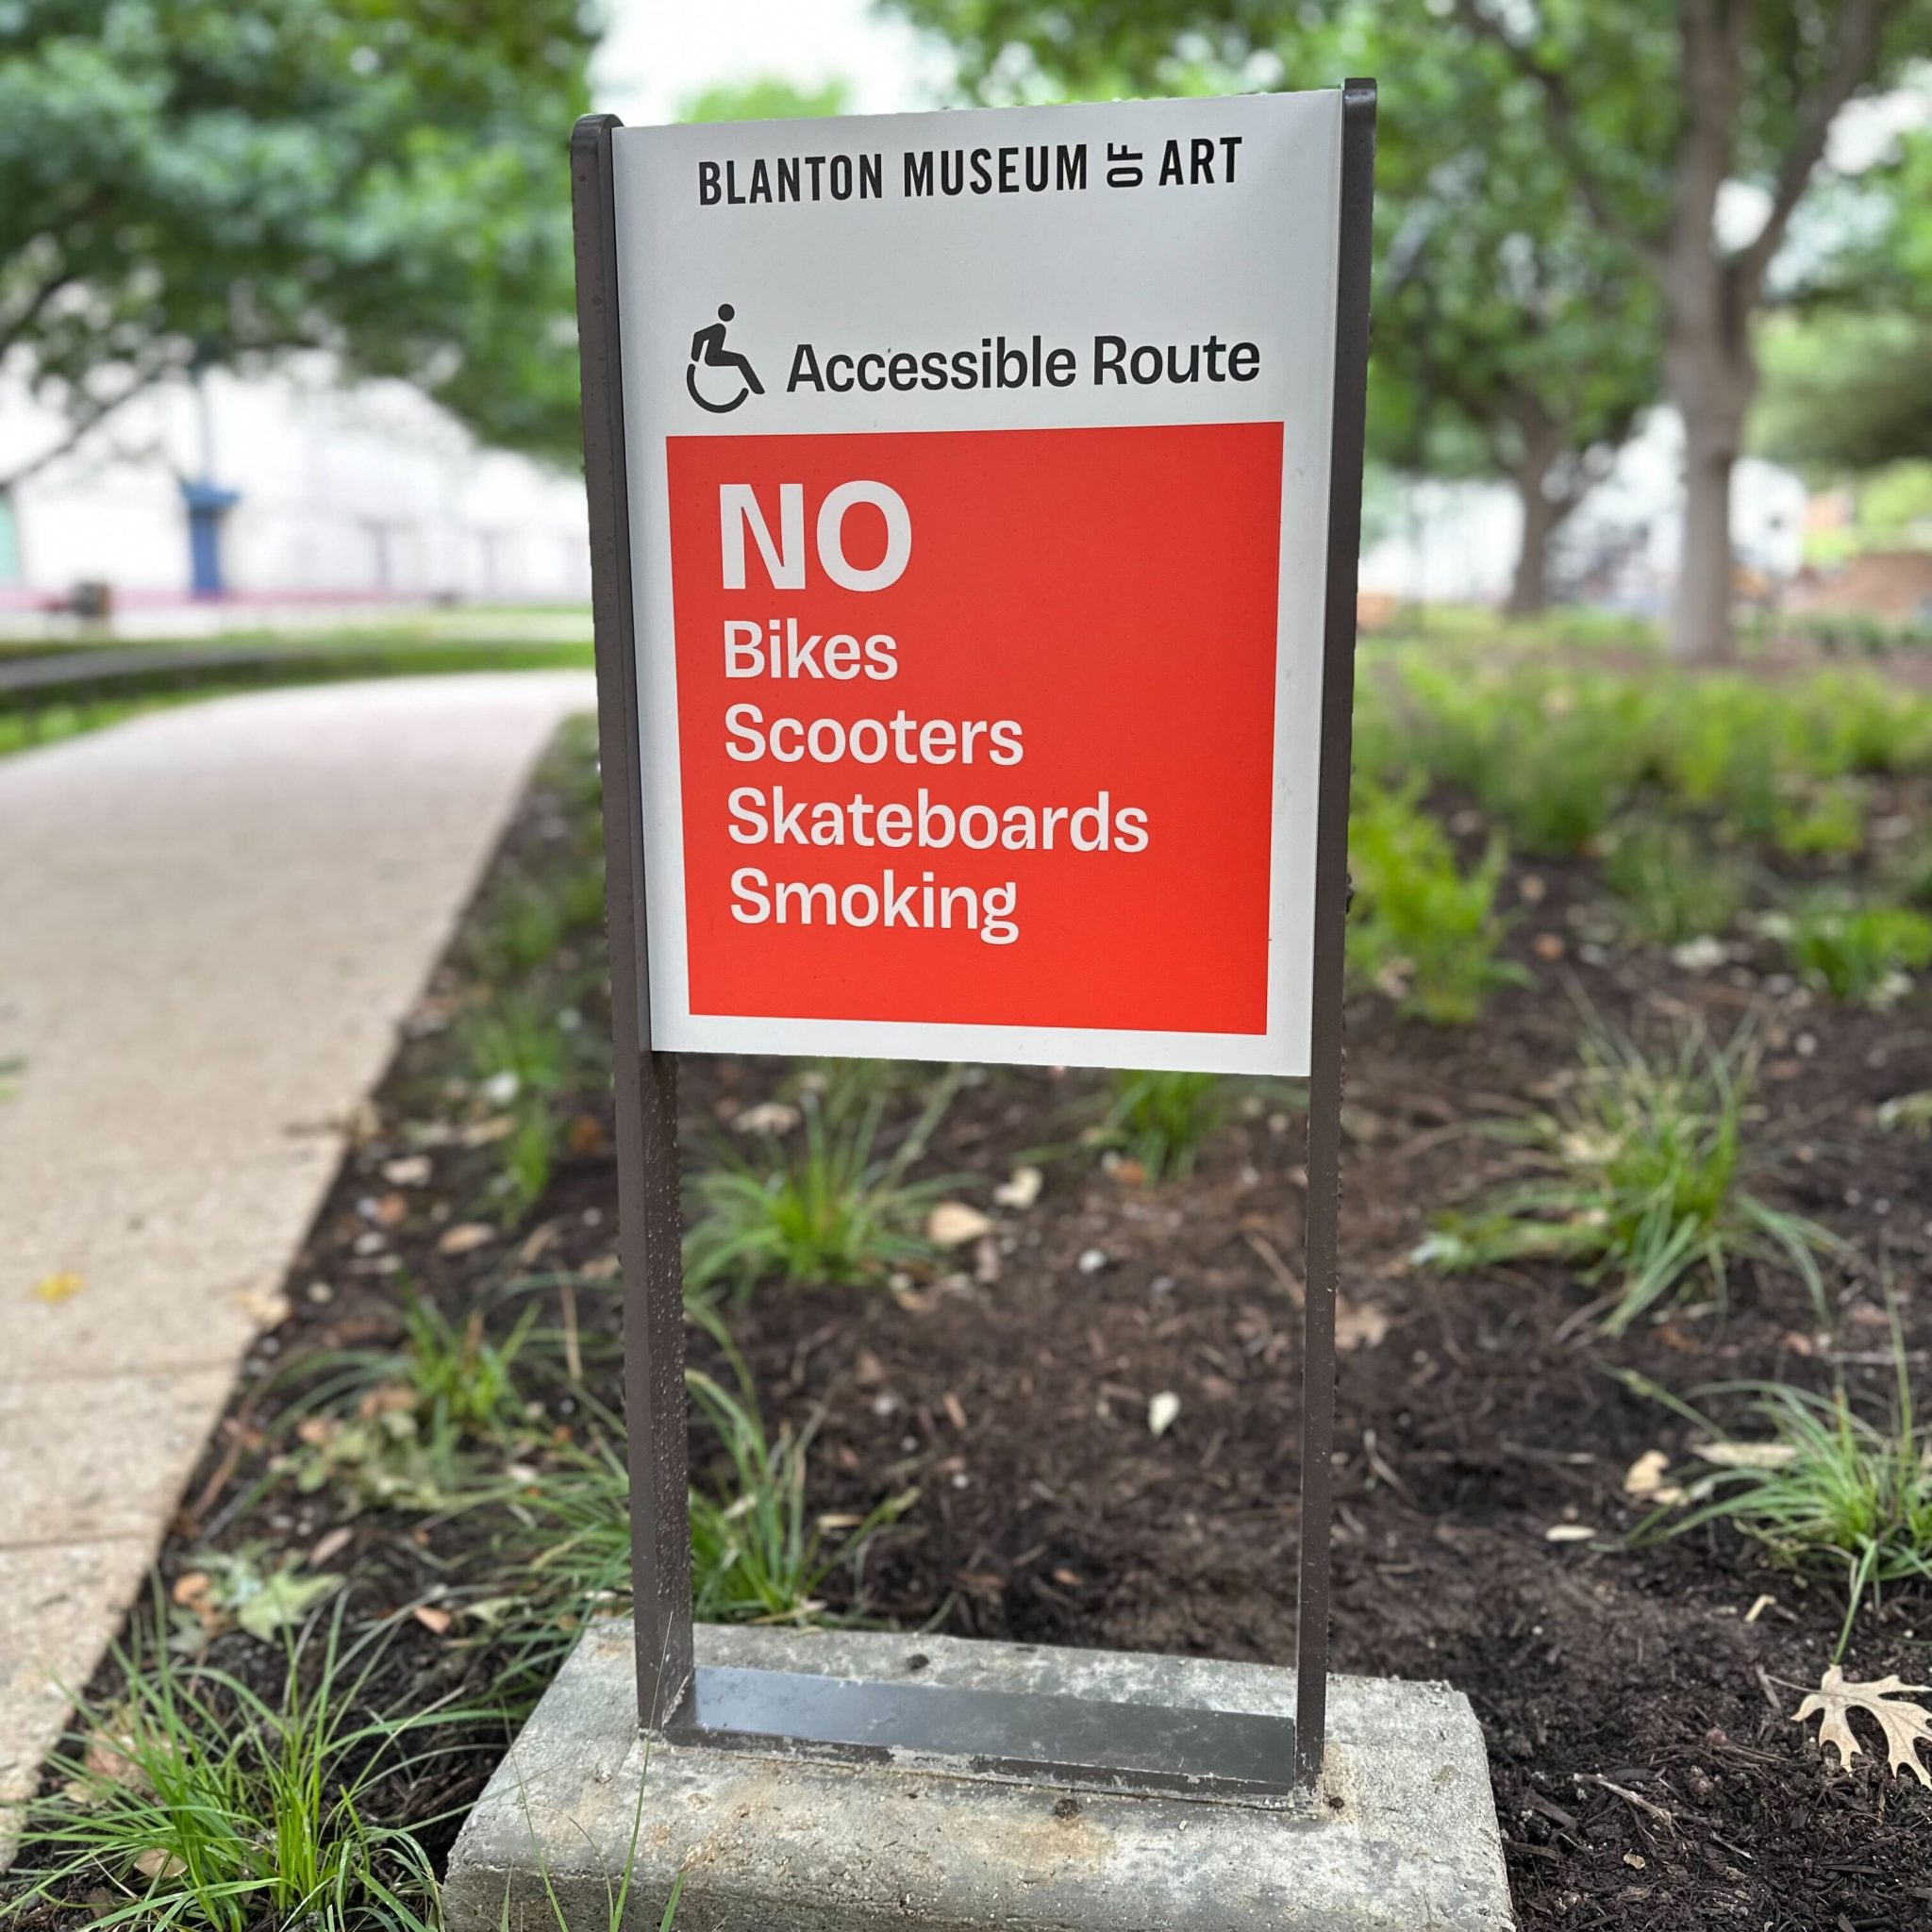 A sign on museum grounds reading "Blanton Museum of Art, Accessible Route. NO Bikes, scooters, skateboards, smoking